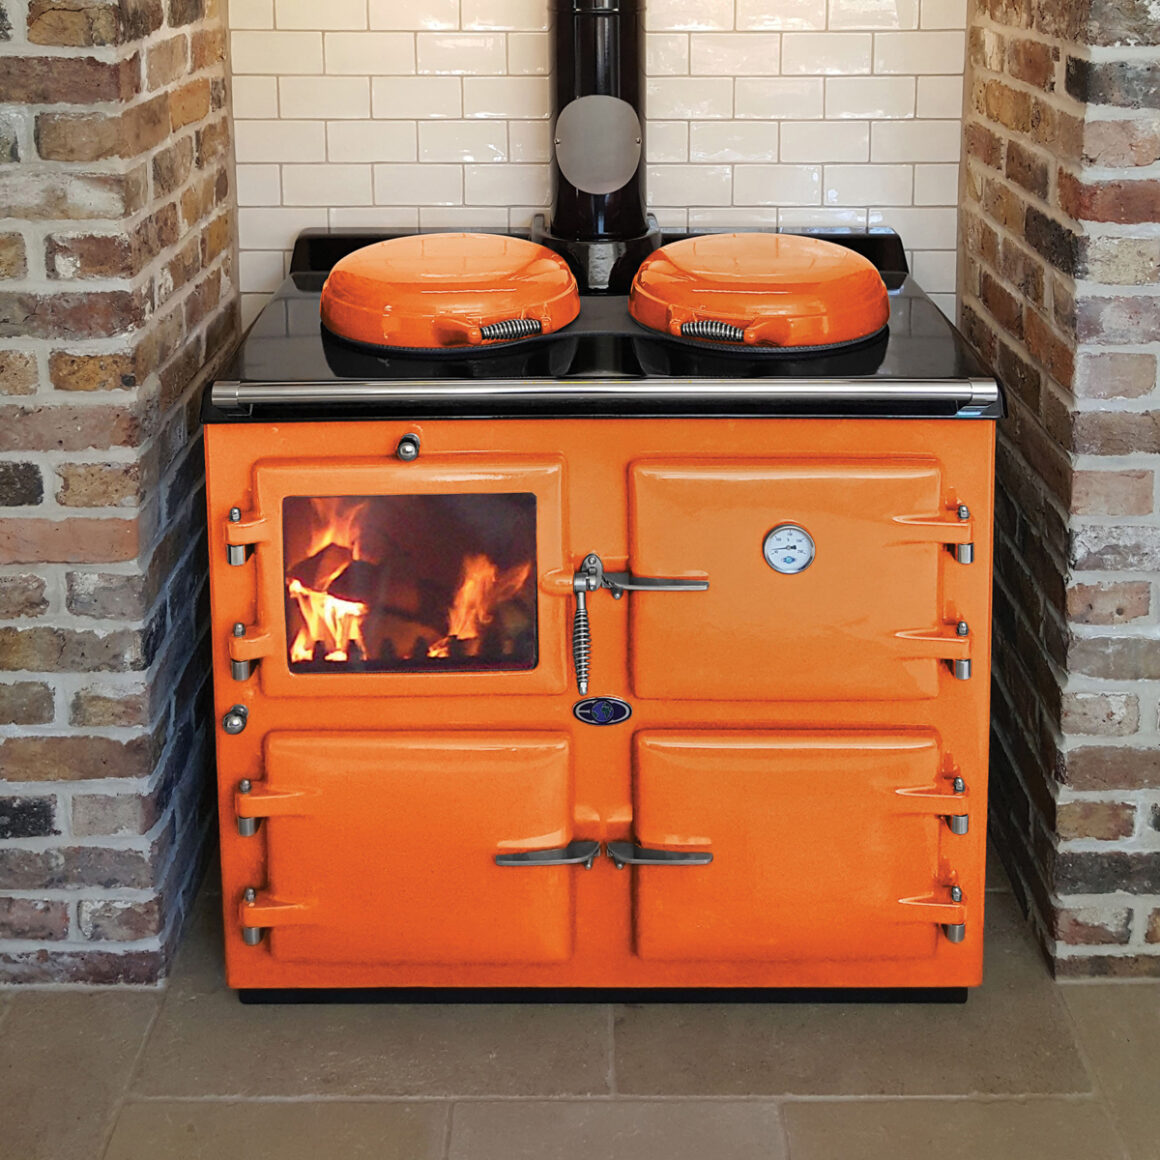 Thornhill Range Cookers 2